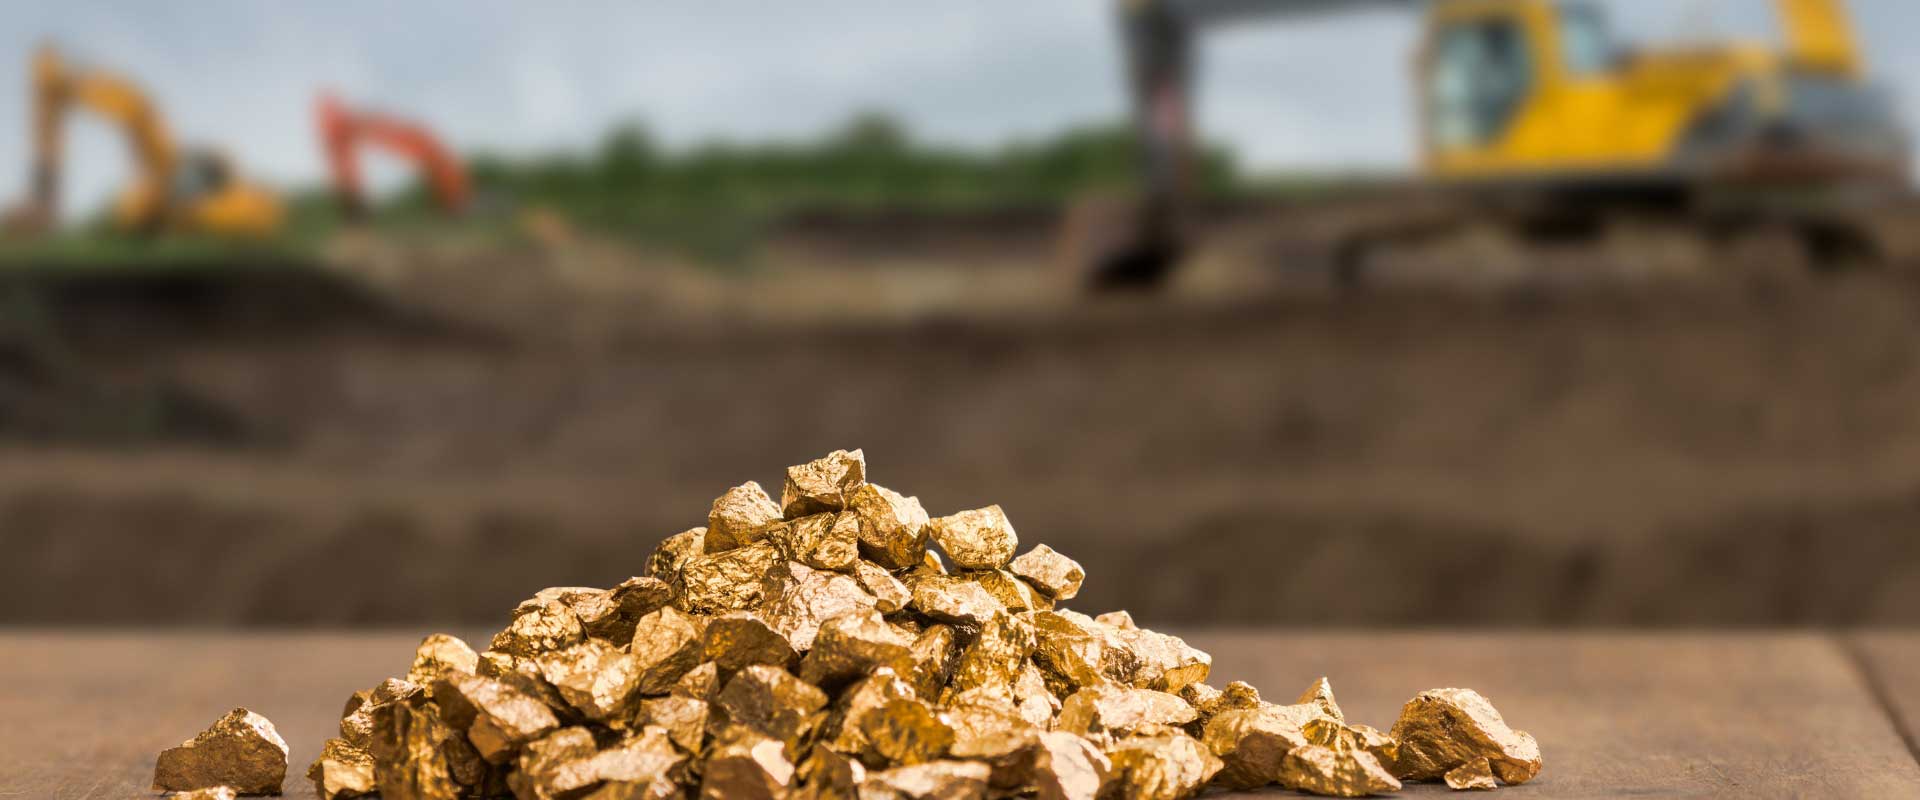 gold nuggets on gold mining site background